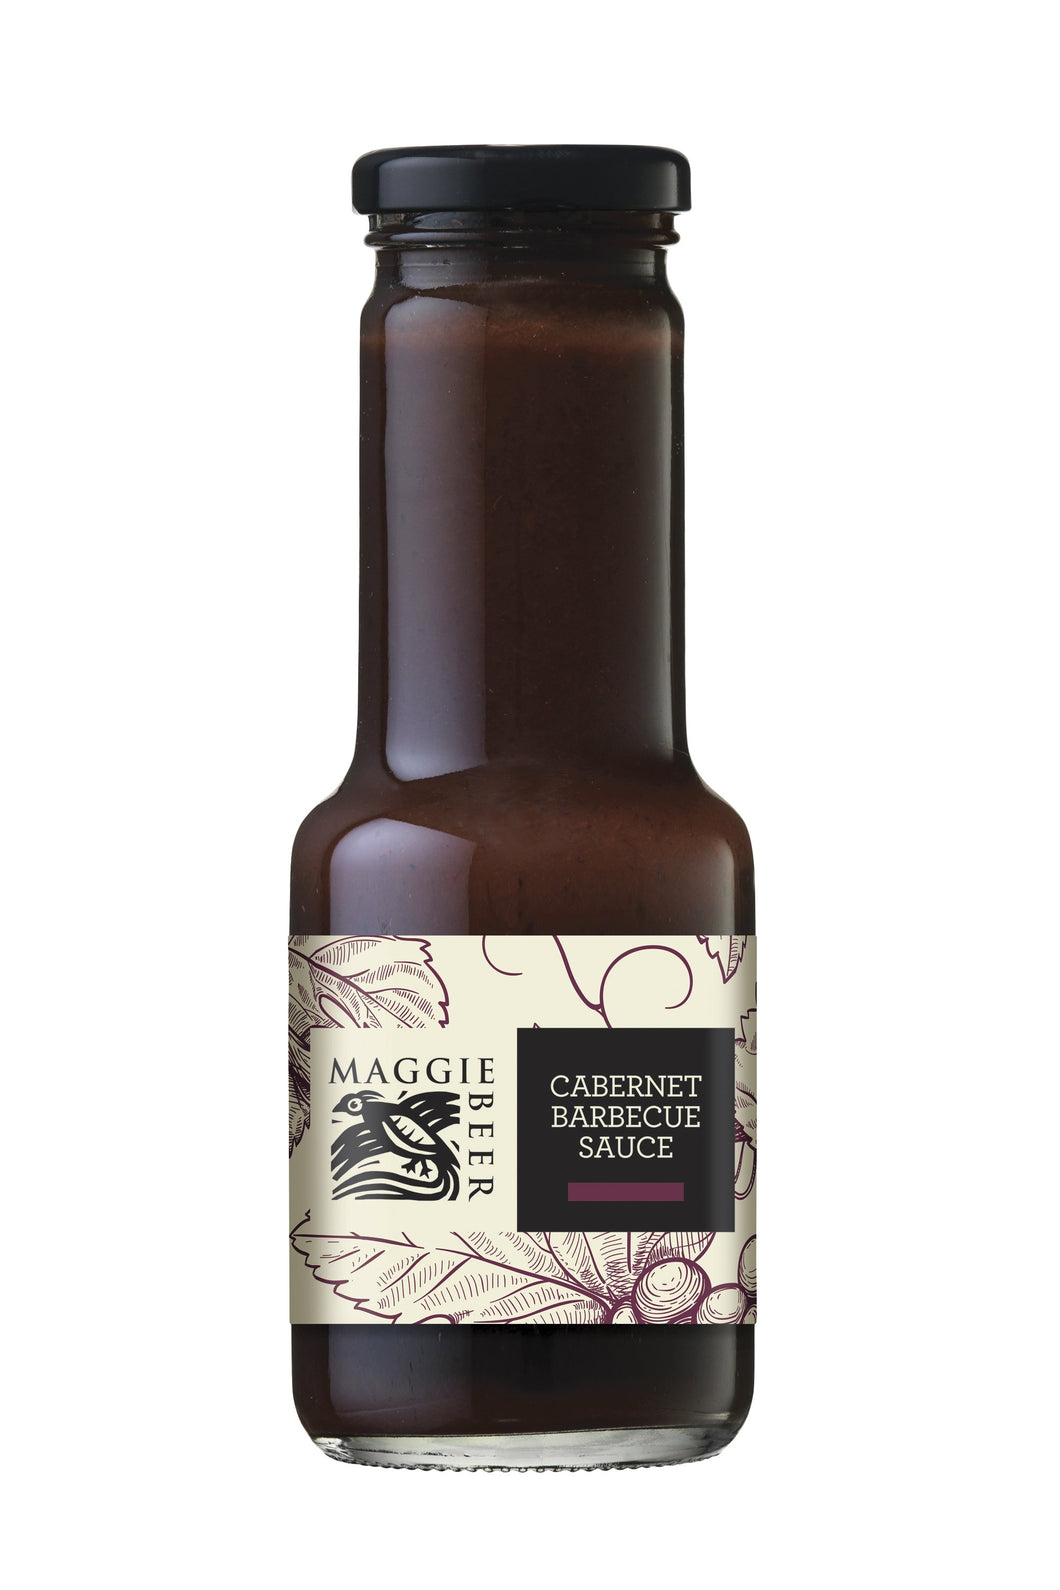 Maggie Beer - Cabernet Barbeque Sauce 6 x 250g